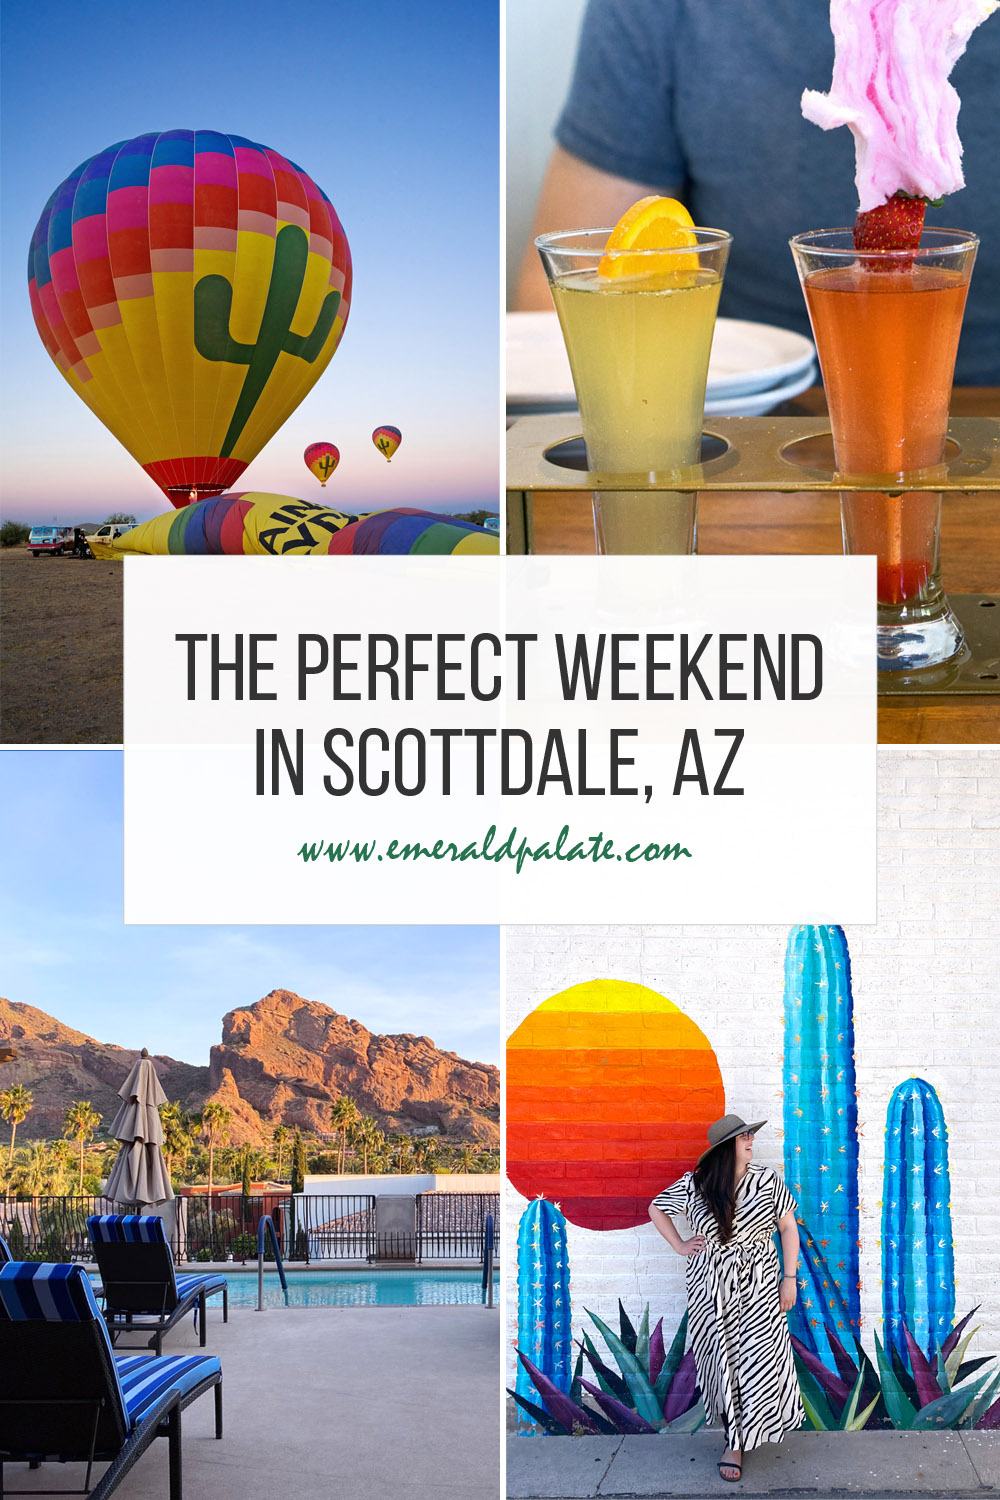 How to spend the perfect weekend in Scottsdale. Whether you're looking for a Scottsdale weekend itinerary for yourself or a Scottsdale bach itinerary for a Scottsdale girls weekend, here are all the best things to do in Scottsdale Arizona in Old Town Scottsdale AZ and beyond! Don't have your Scottsdale Arizona bachelorette party without reading this list of top things to do in Scottsdale AZ first!